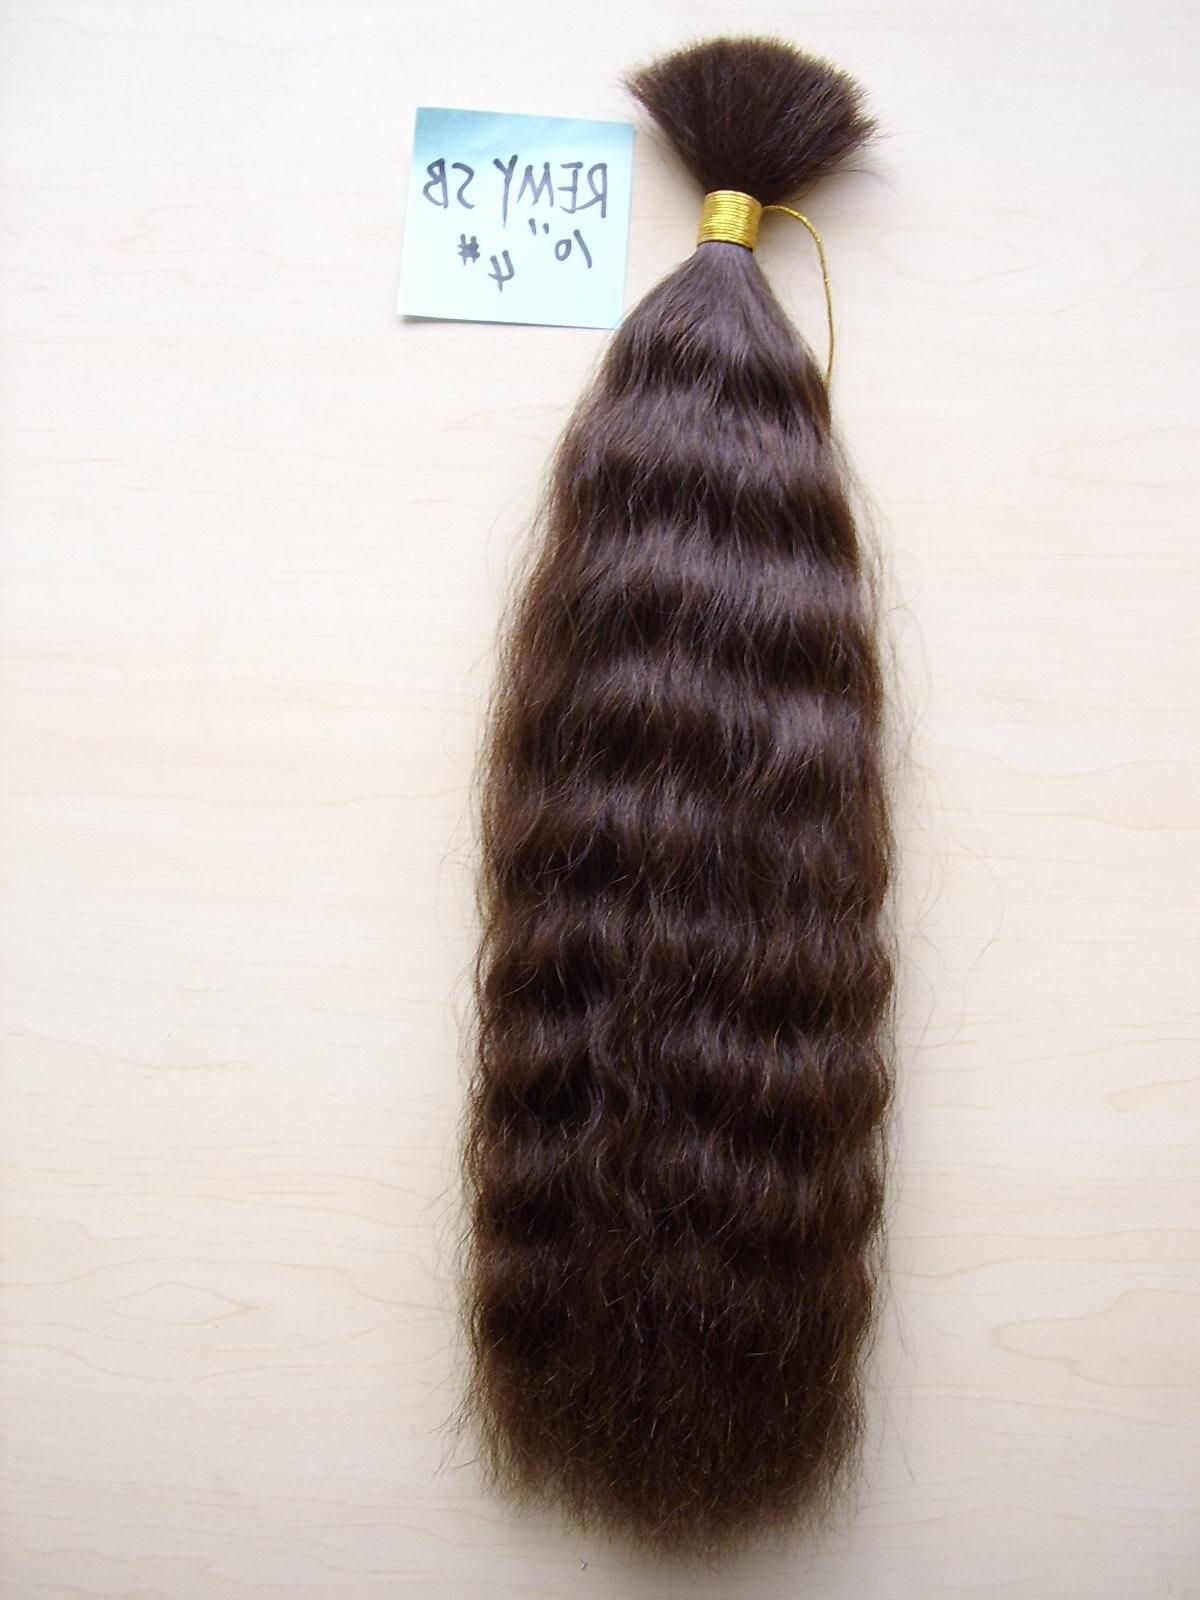 We have 1500 full lace wigs in